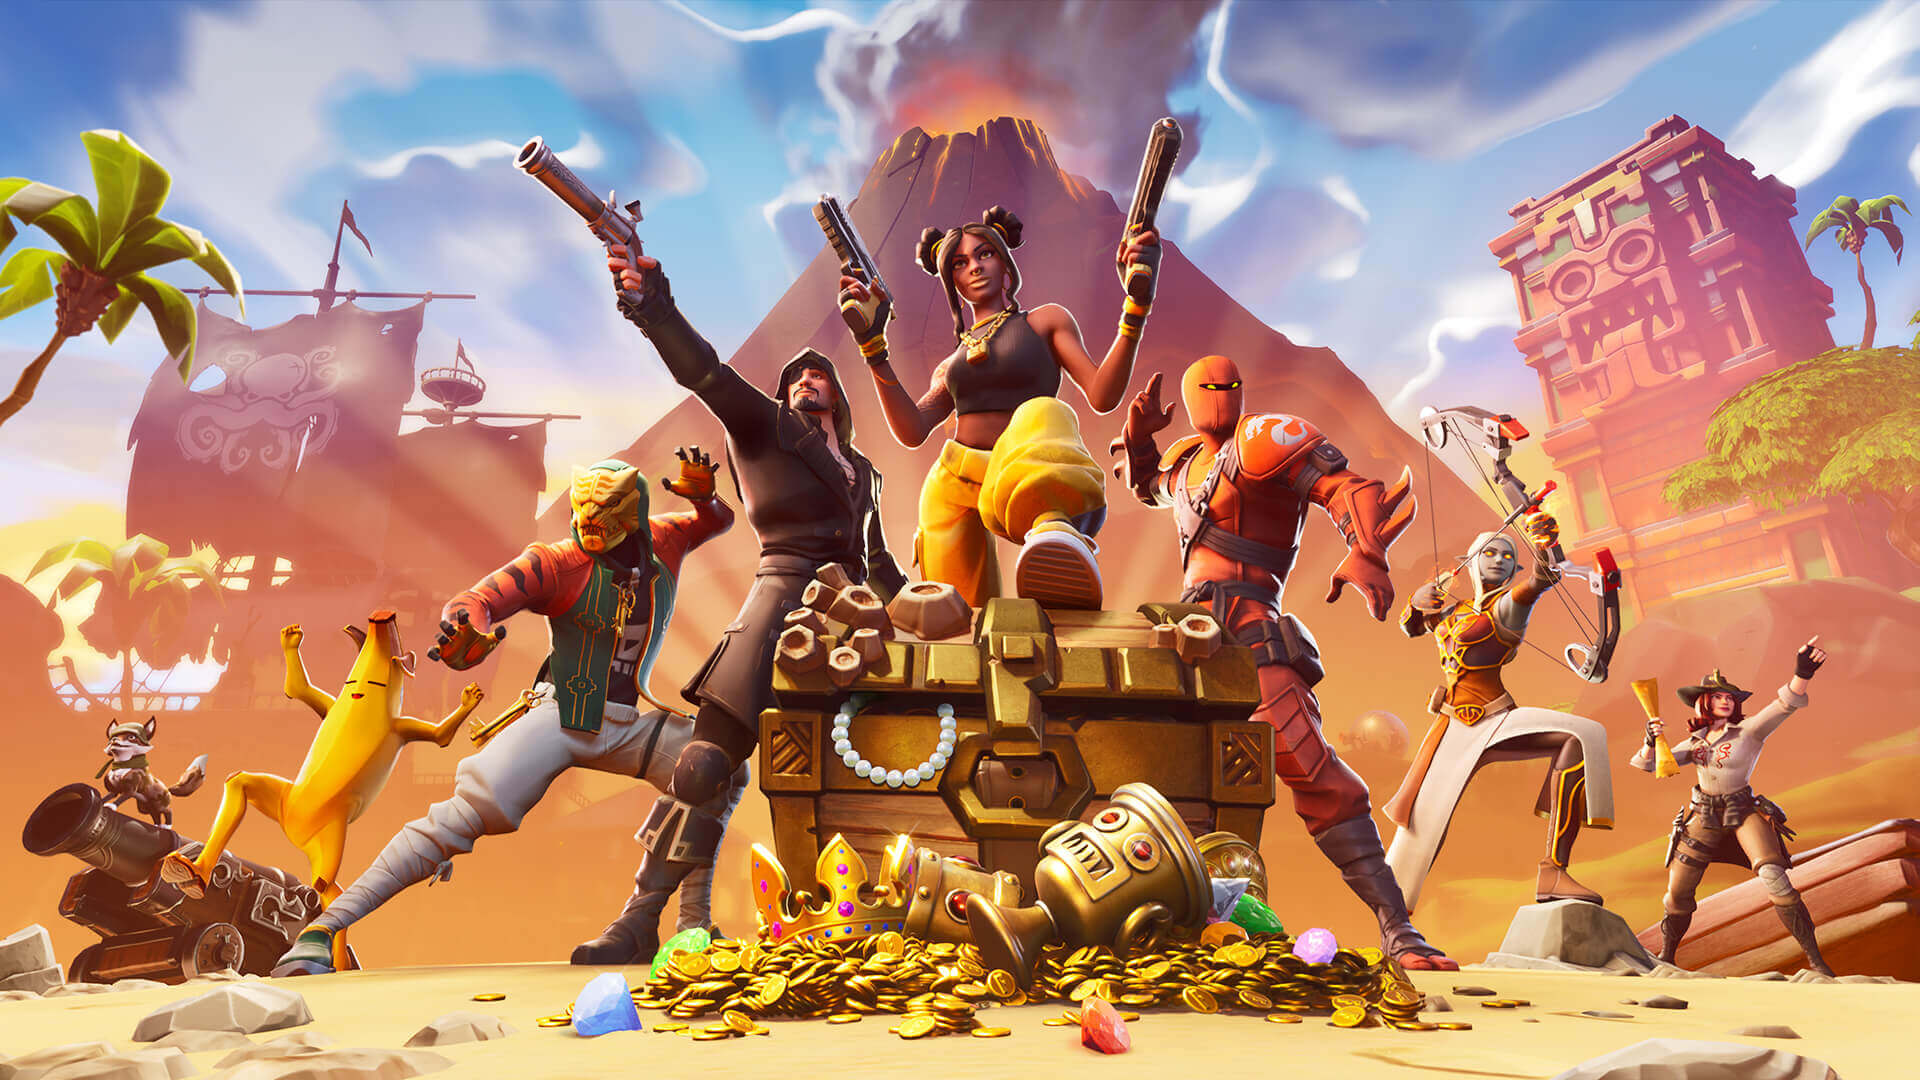 Epic Games wants to reinstate Fortnite app on App Store, its iOS players  drop by 60 percent-Tech News , Firstpost